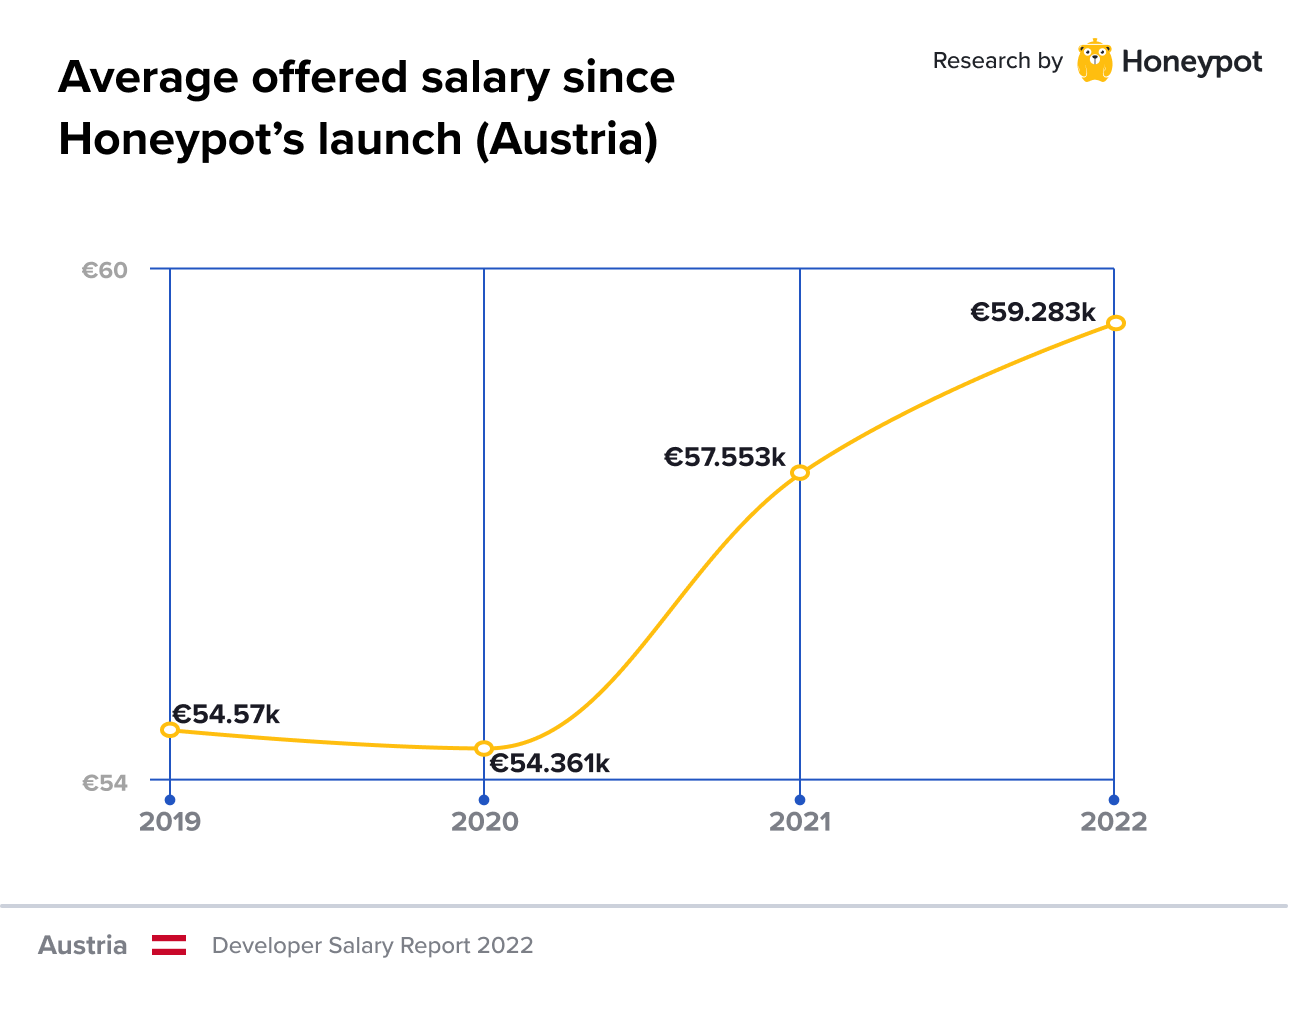 Average offered salary since Honeypot’s launch (Austria)